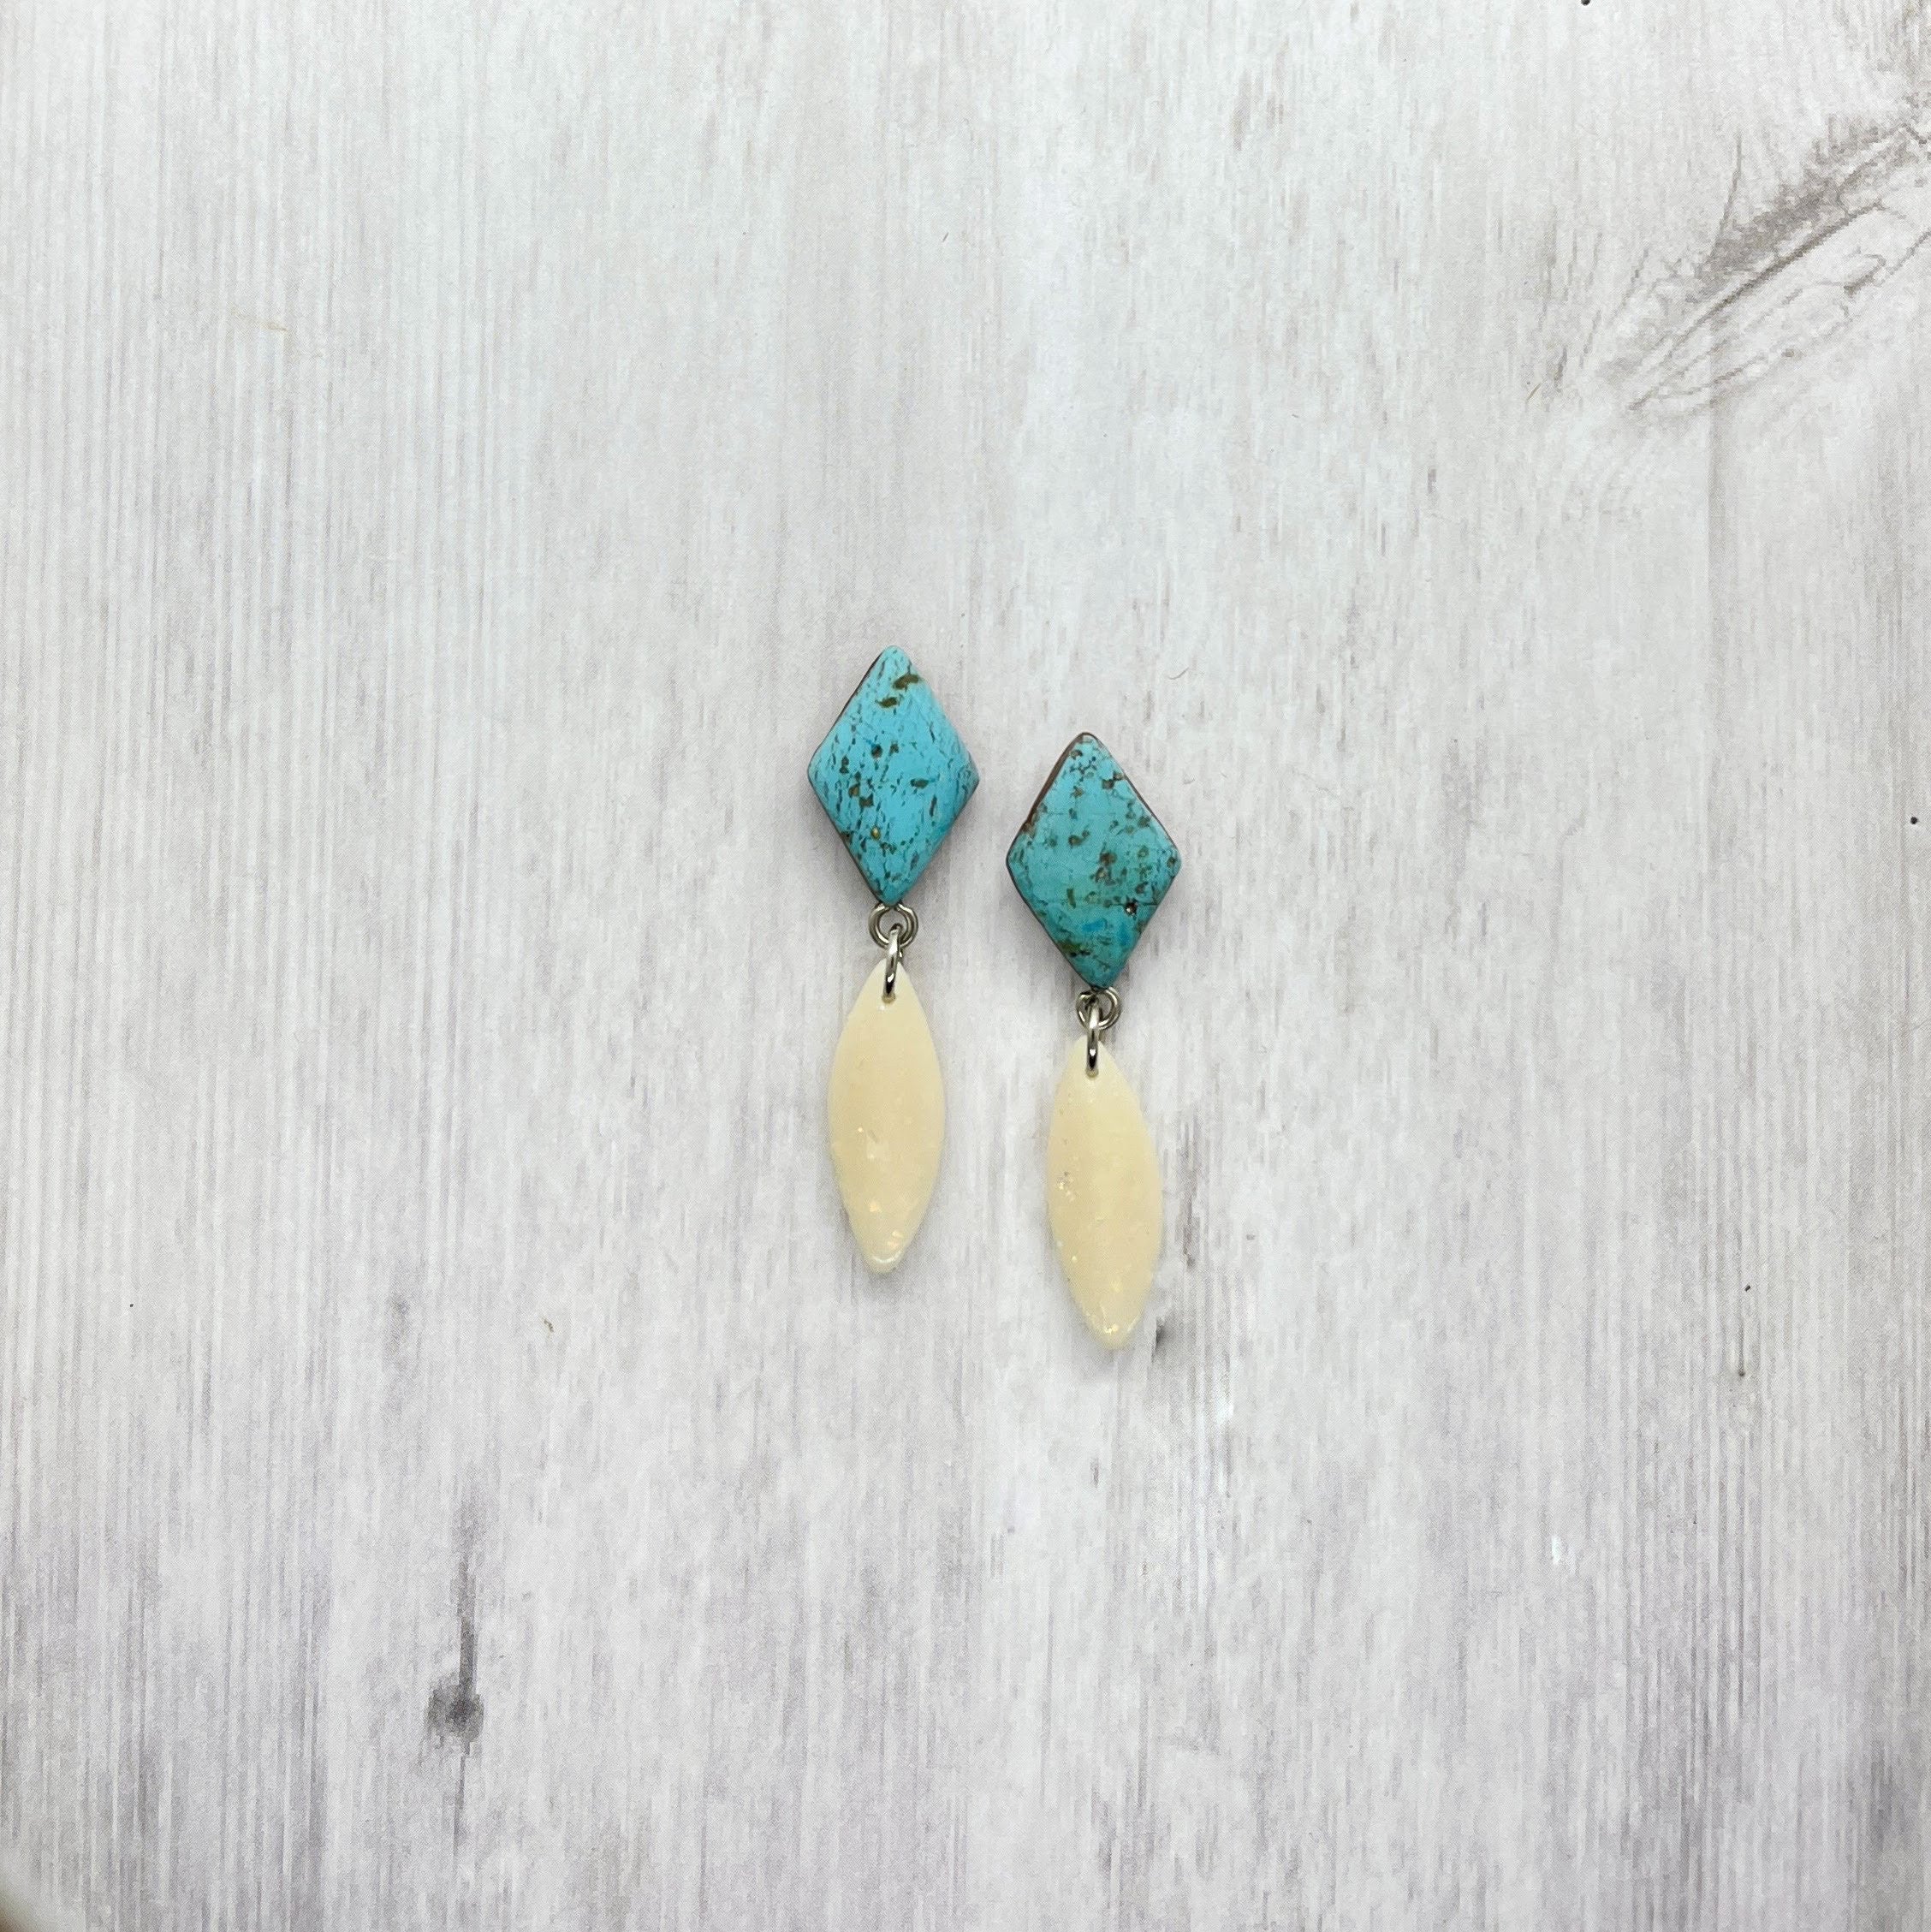 Turquoise and Opal Earrings